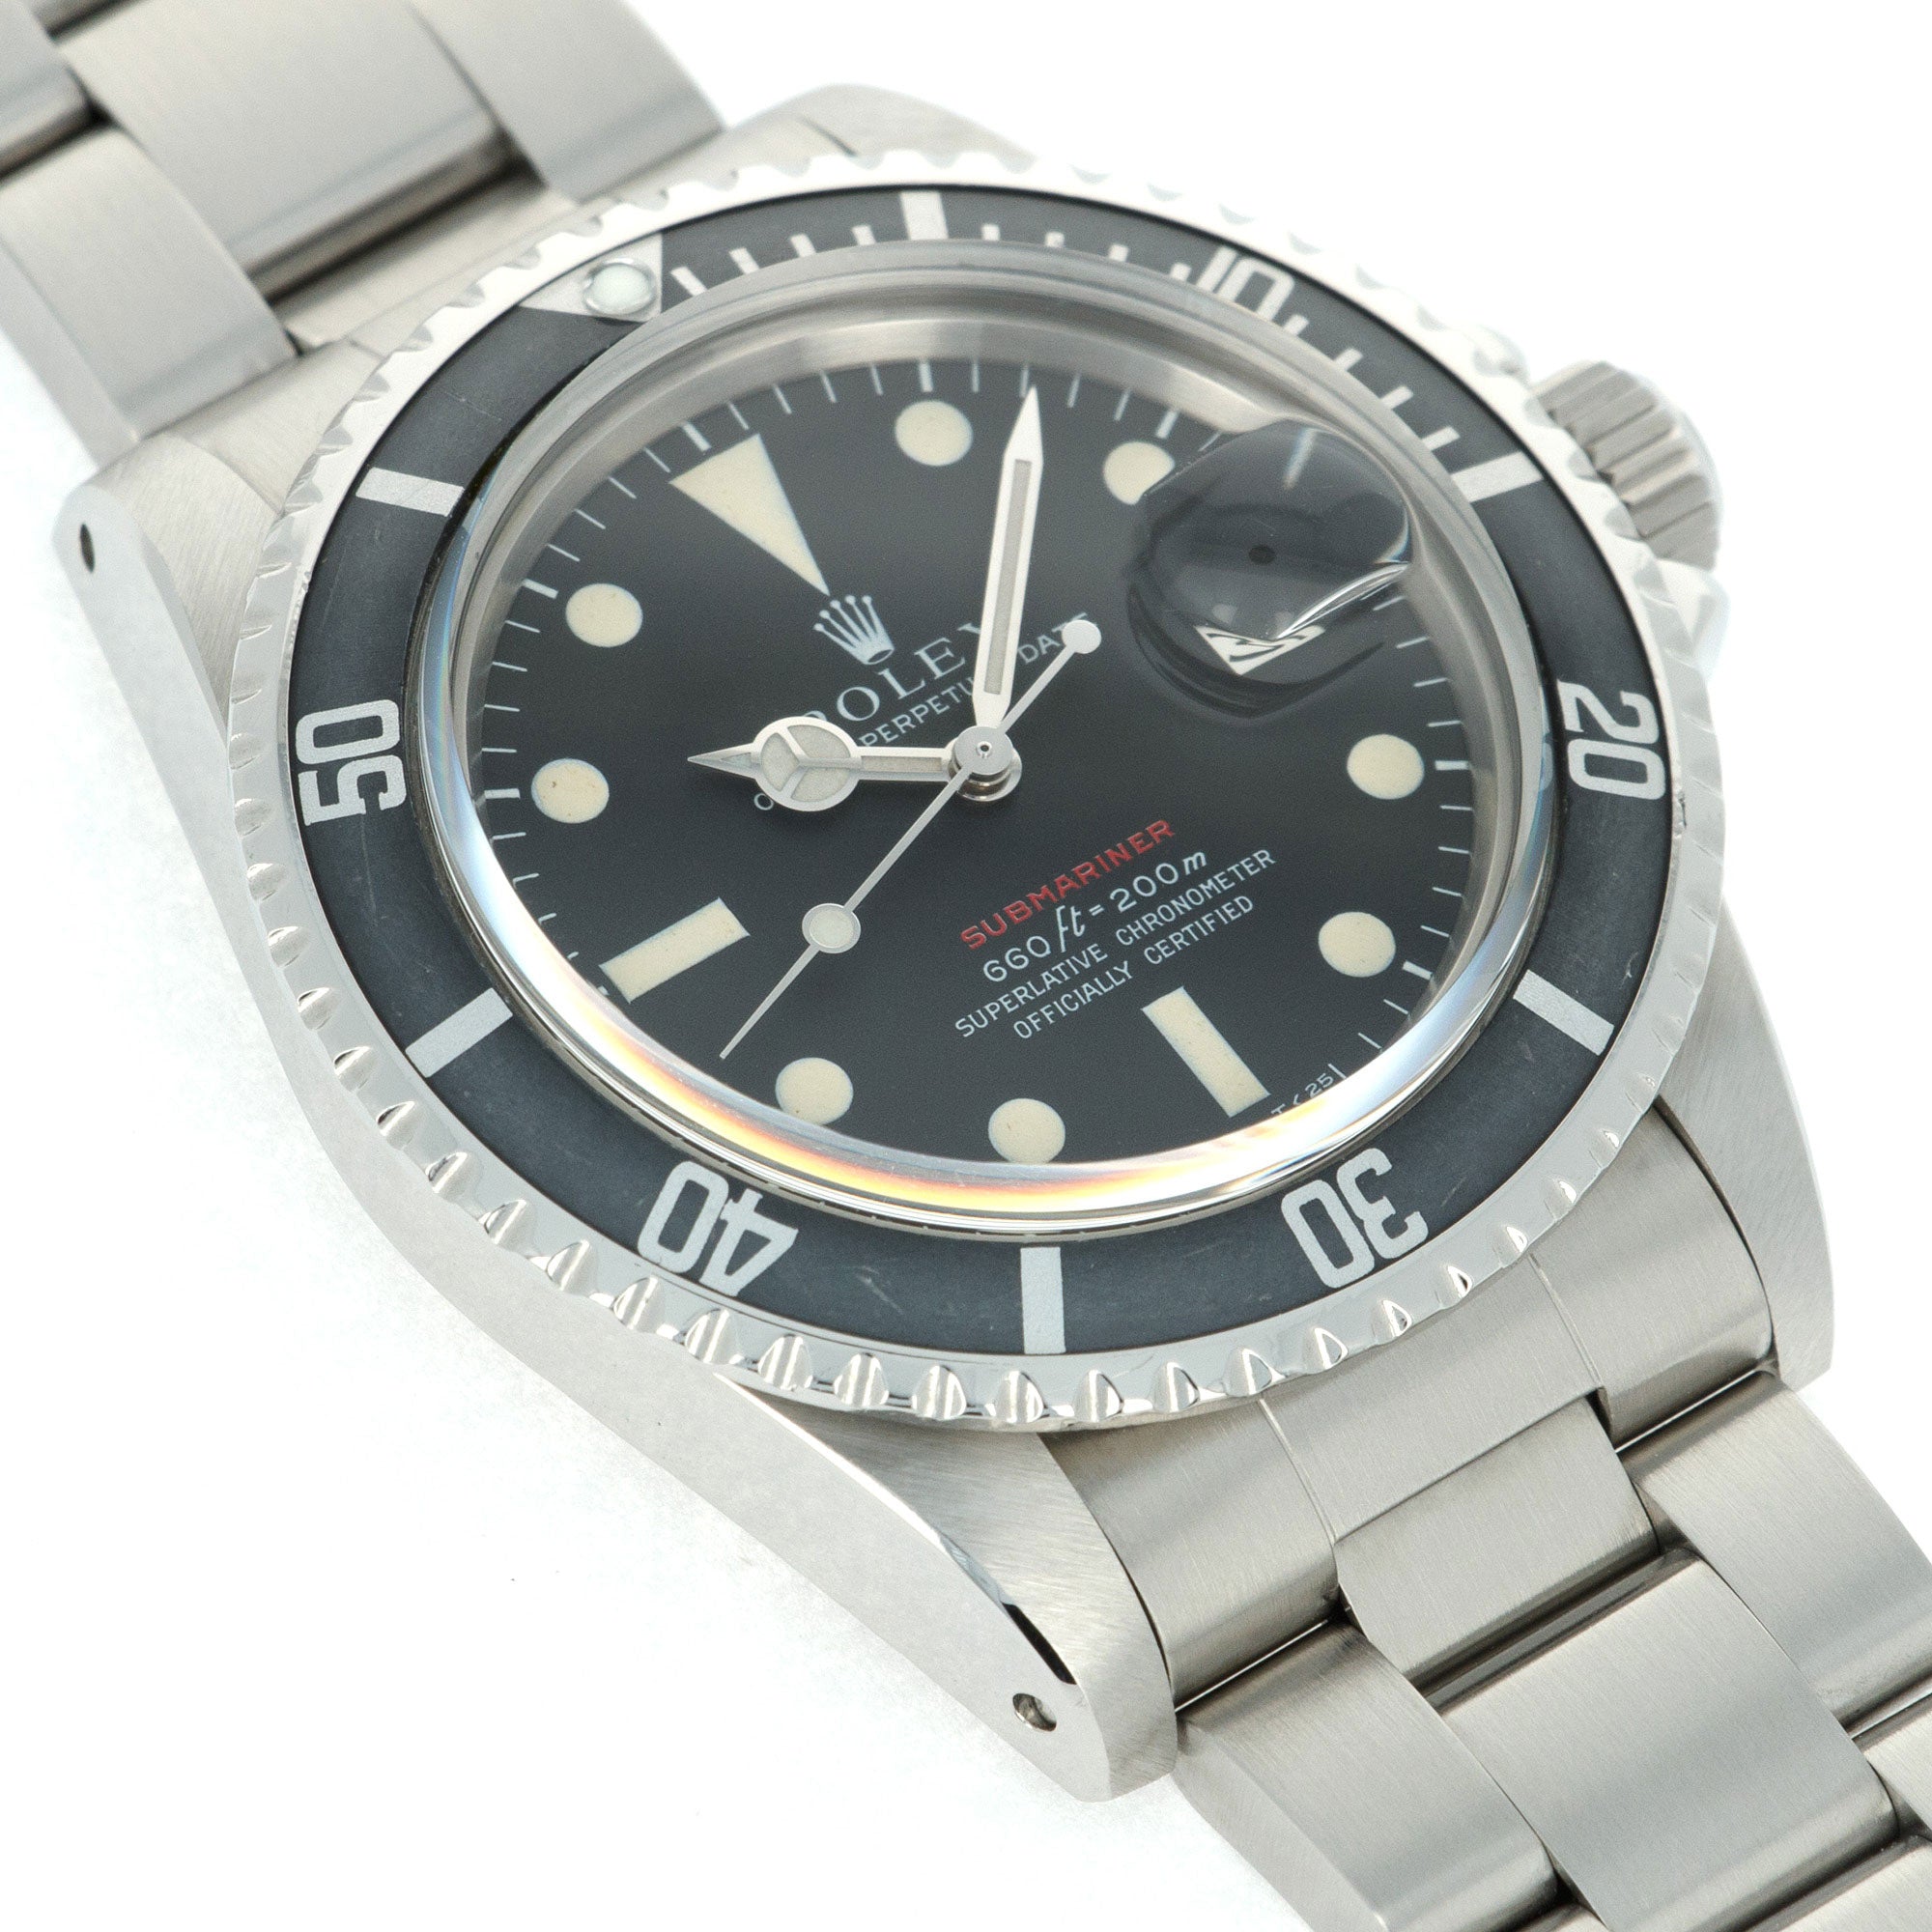 Rolex - Rolex Red Submariner Watch Ref. 1680 with Original Box and Papers - The Keystone Watches